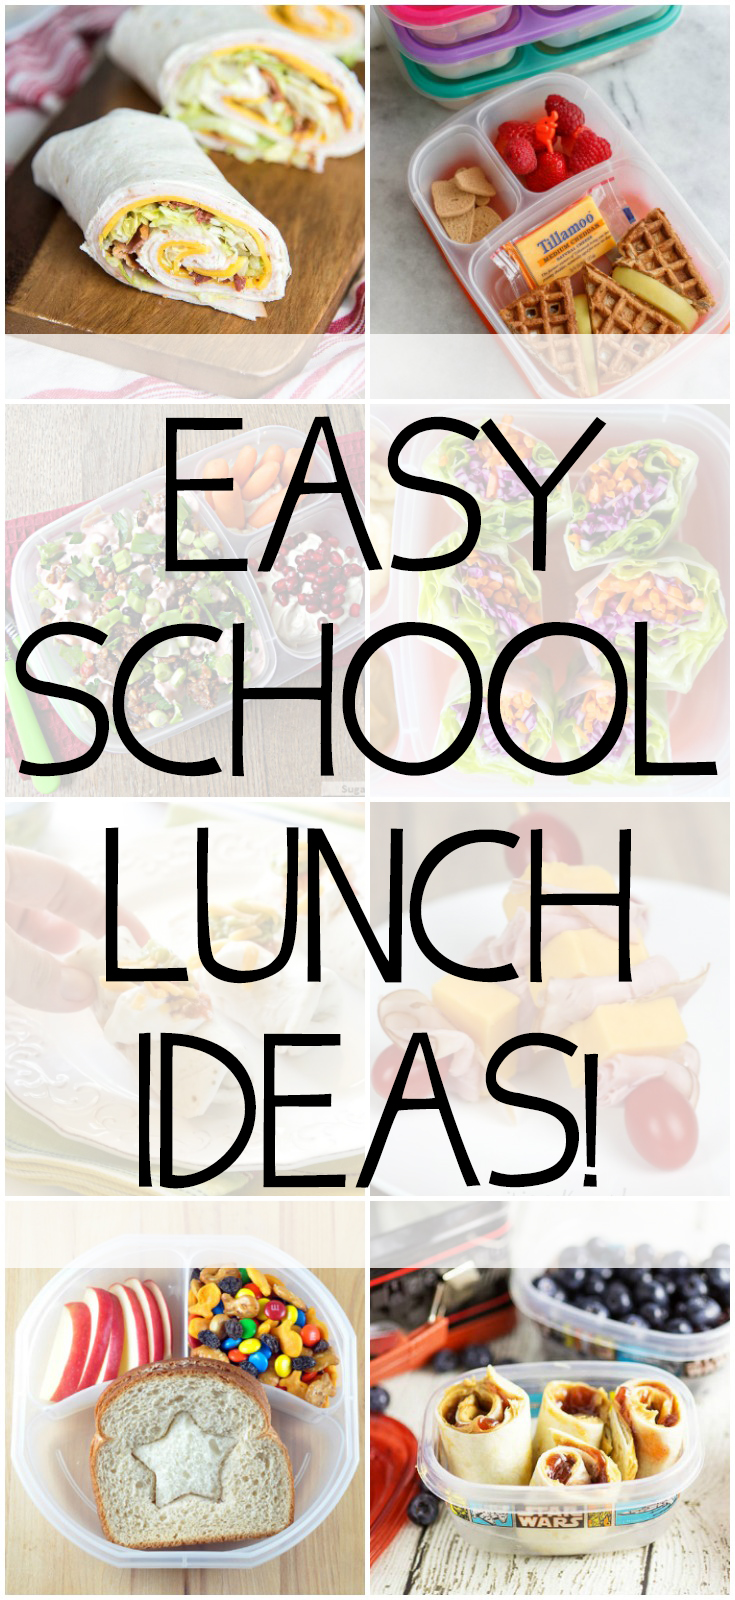 10 More Healthy Lunch Ideas for Kids (for the School Lunch Box or Home) -  Kristine's Kitchen